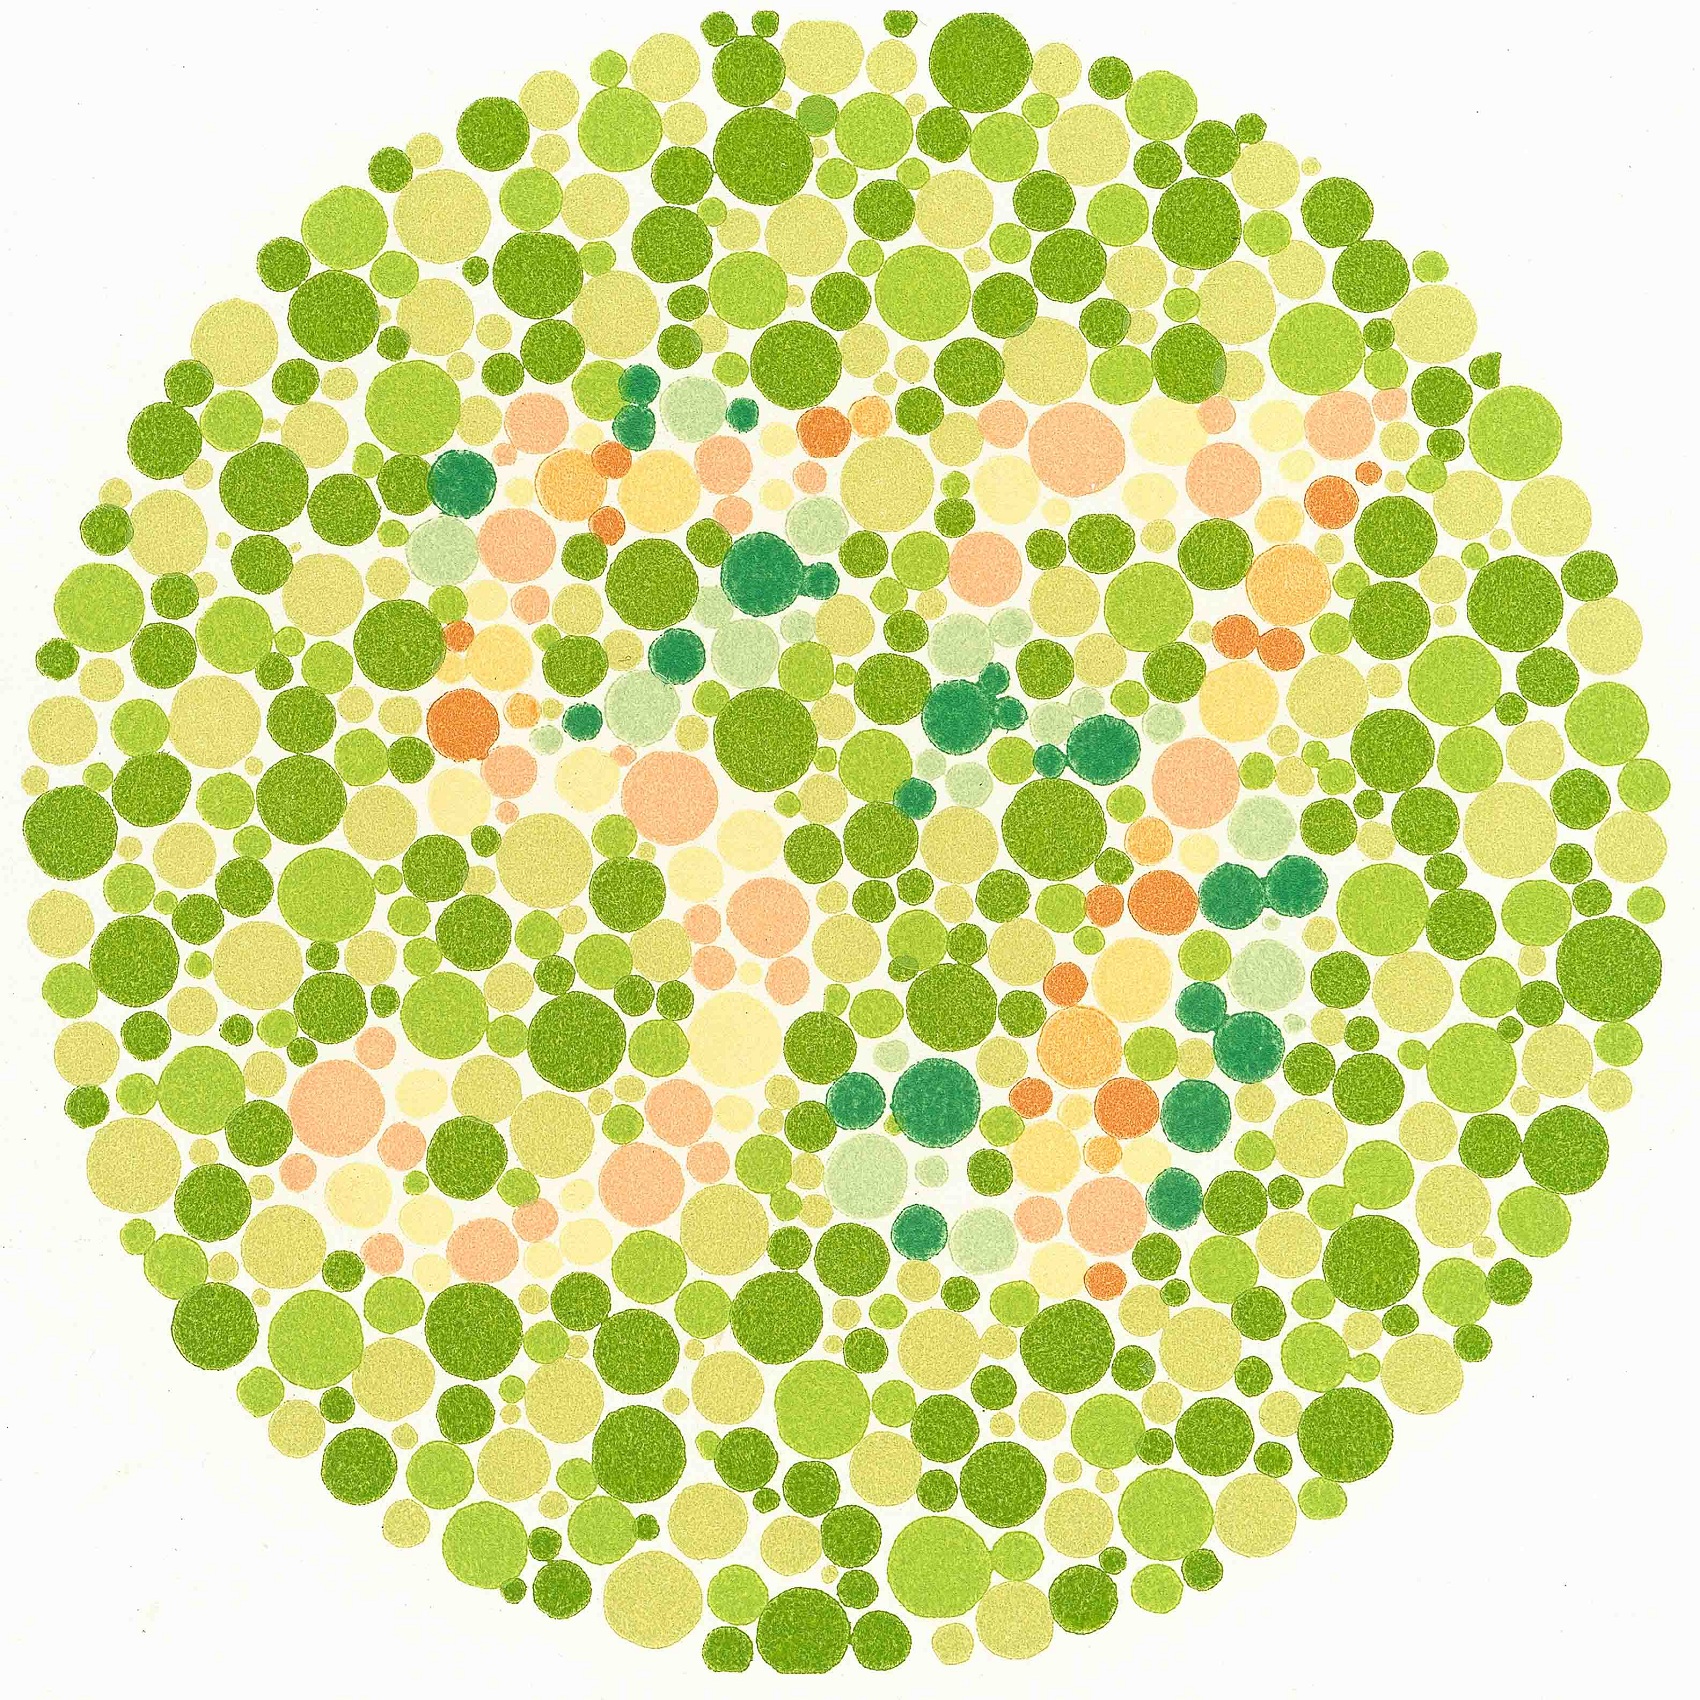 10 Images To Test The Color Blind - Facts Verse